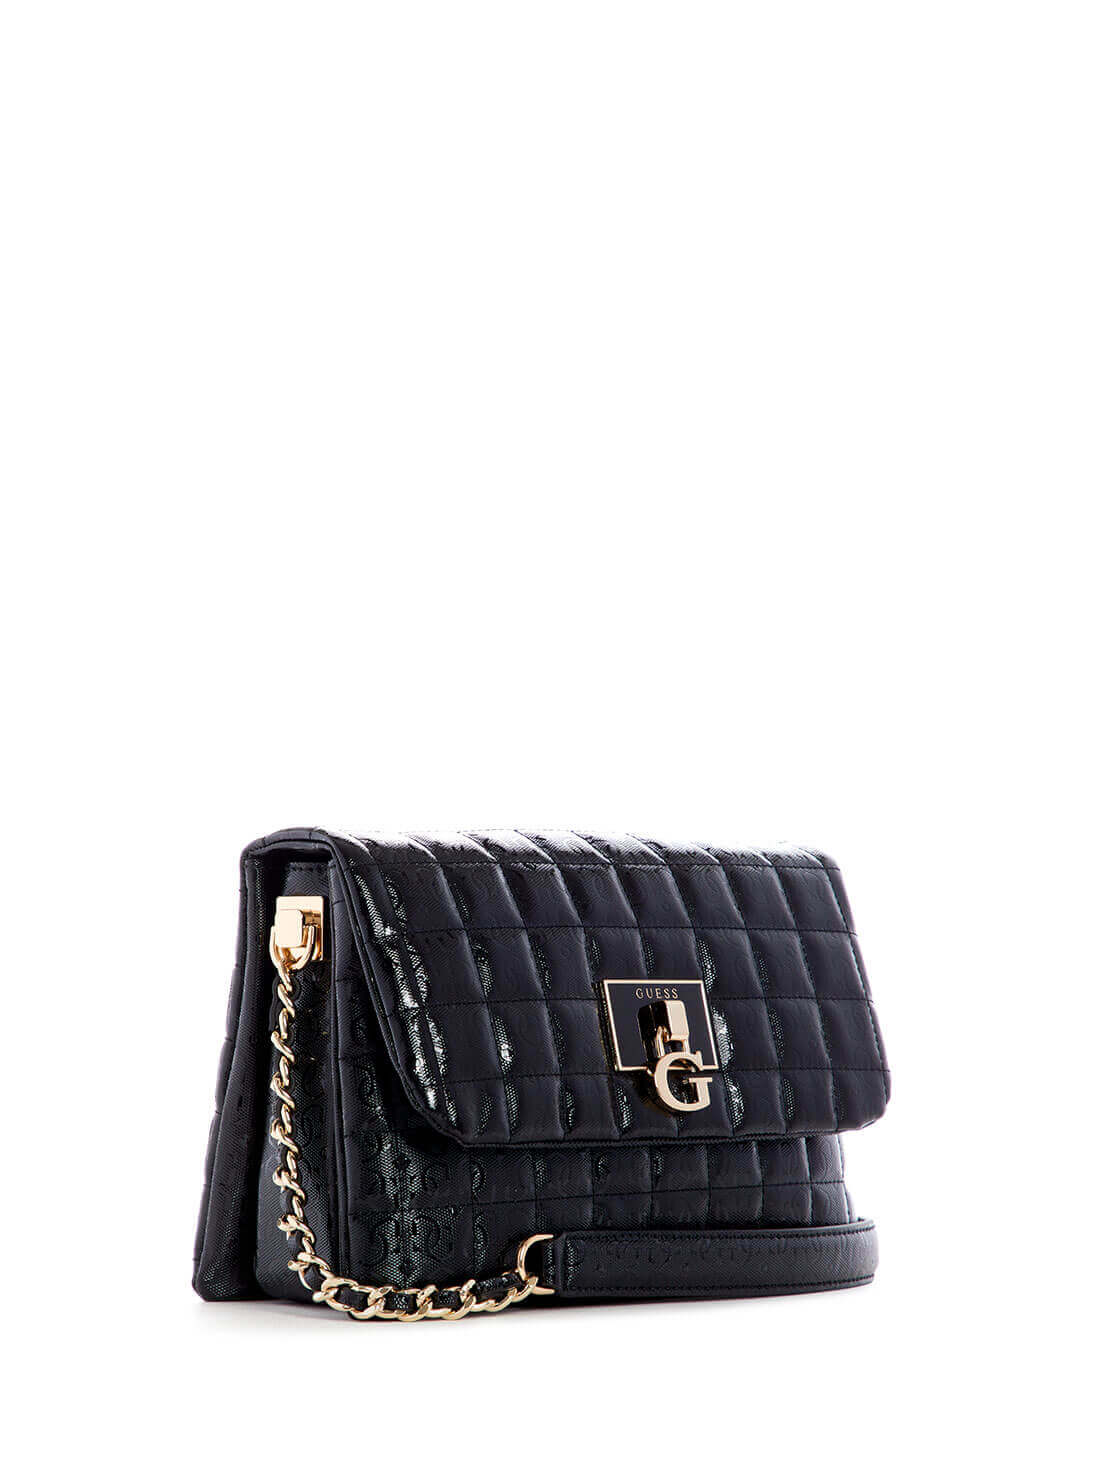 GUESS Womens Black Quilted Kobo Crossbody Bag GG841121 Front Side View